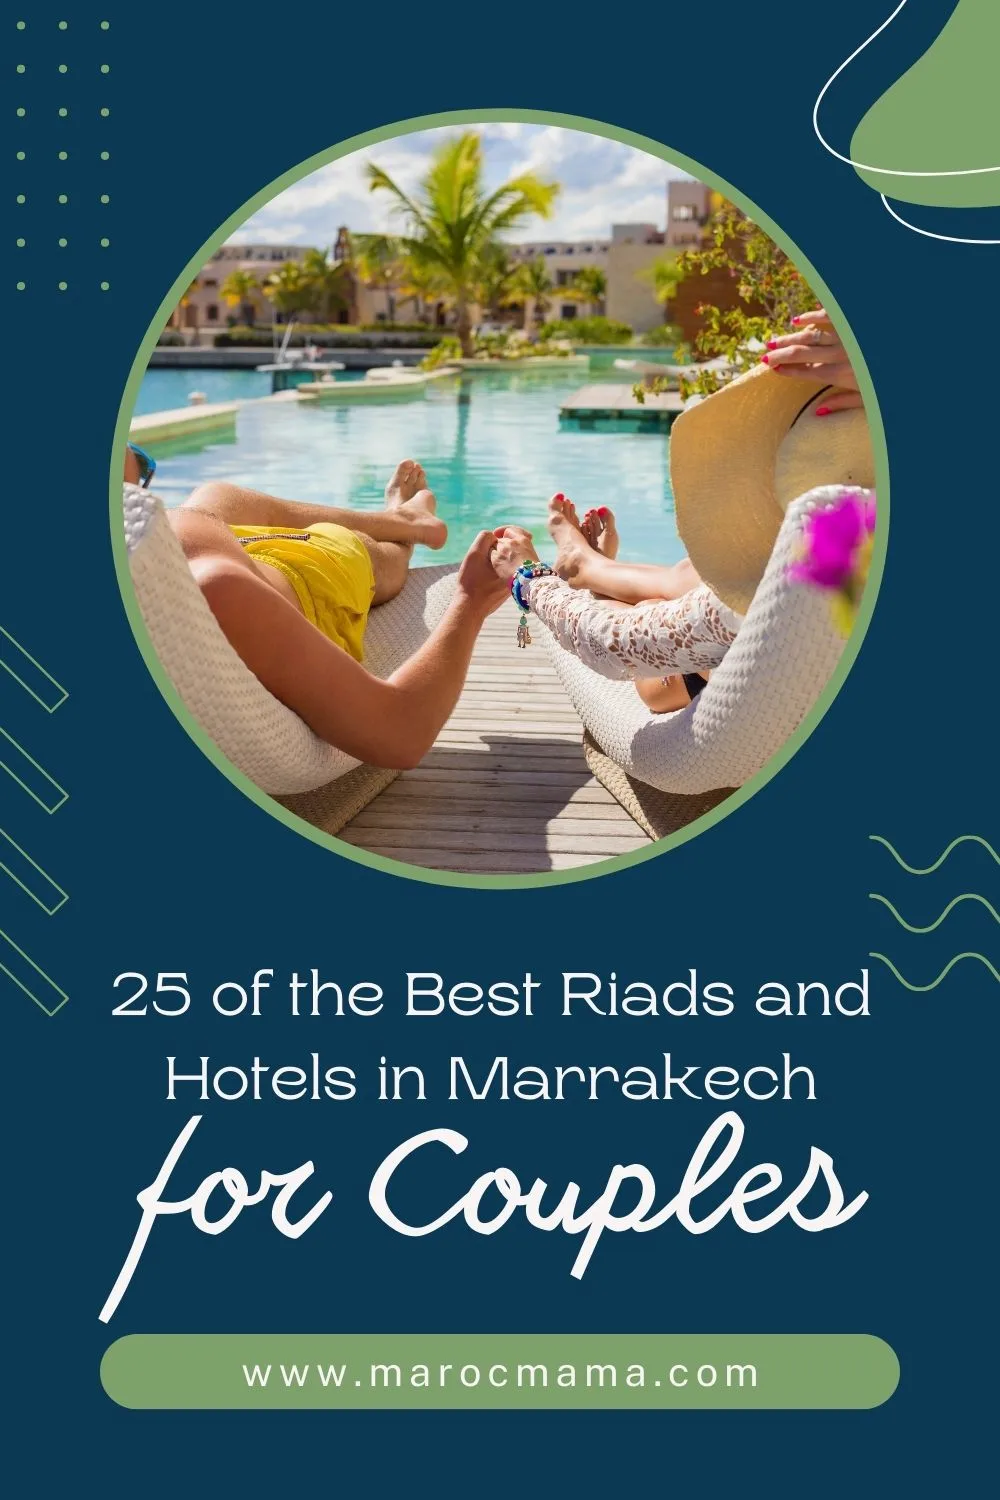 Couple in vacation in a luxury resort with the text 25 of the Best Riads and Hotels in Marrakech for Couples